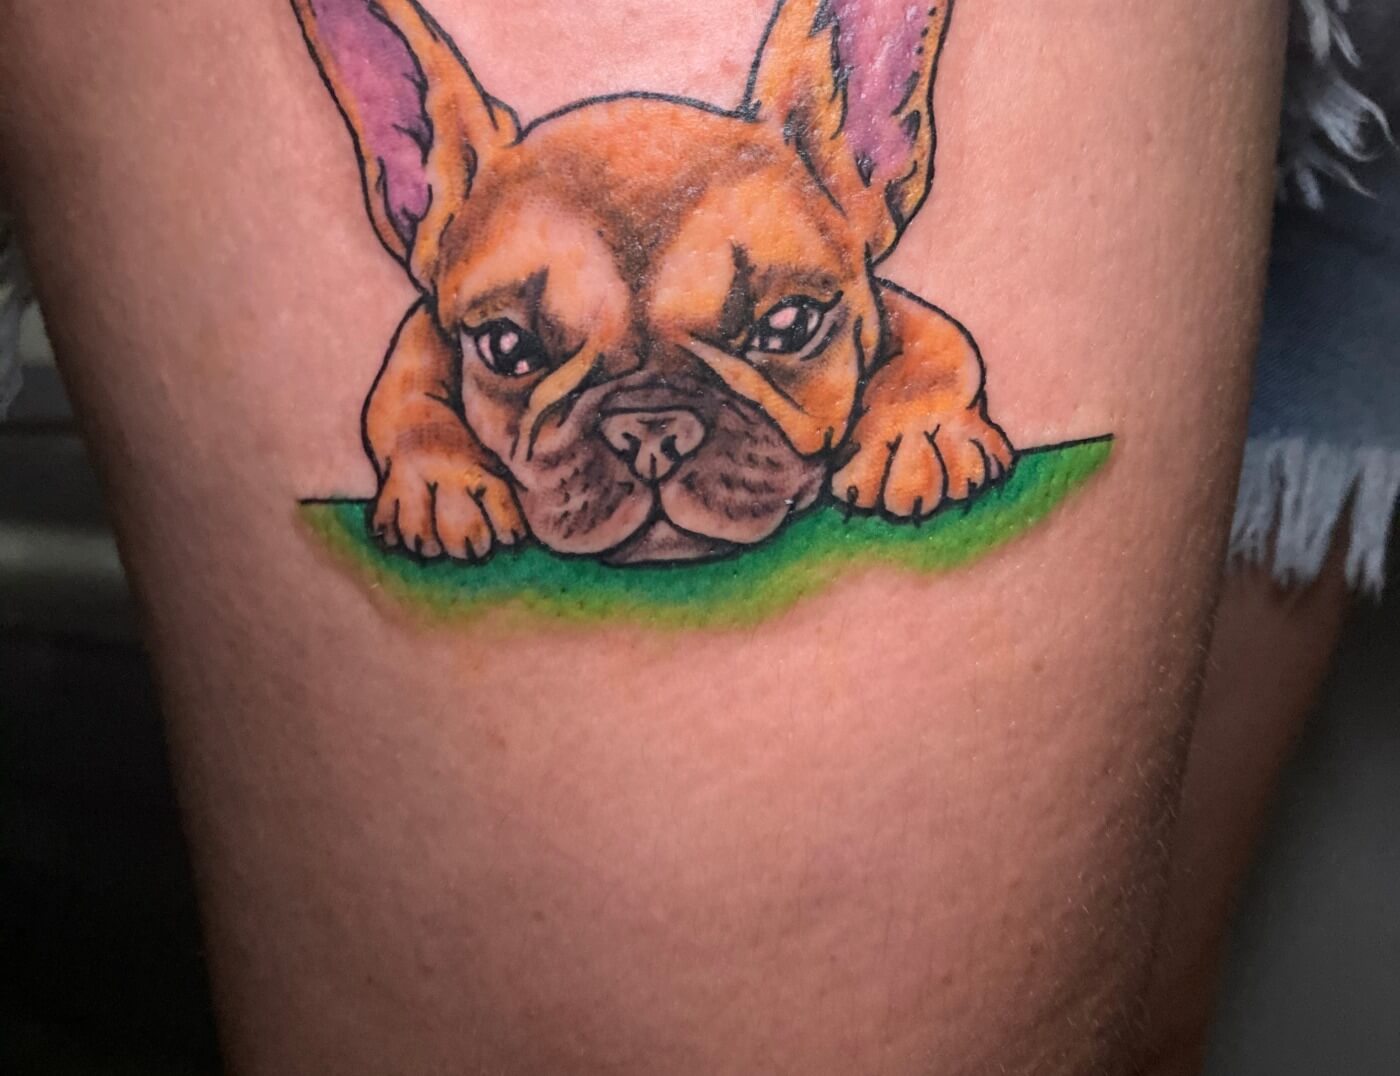 French Bulldog by Funk Tha World At Iron Palm Tattoos In Atlanta, GA. Frenchies are loved for their moderate behavior and funny antics. We love them so much Iron Palm has Frenchies too. Stop by and our body artists can give your best friend immortality through ink! We're open late night until 2AM. Call 404-973-7828 or stop by for a free consultation. Walk ins are always welcome.